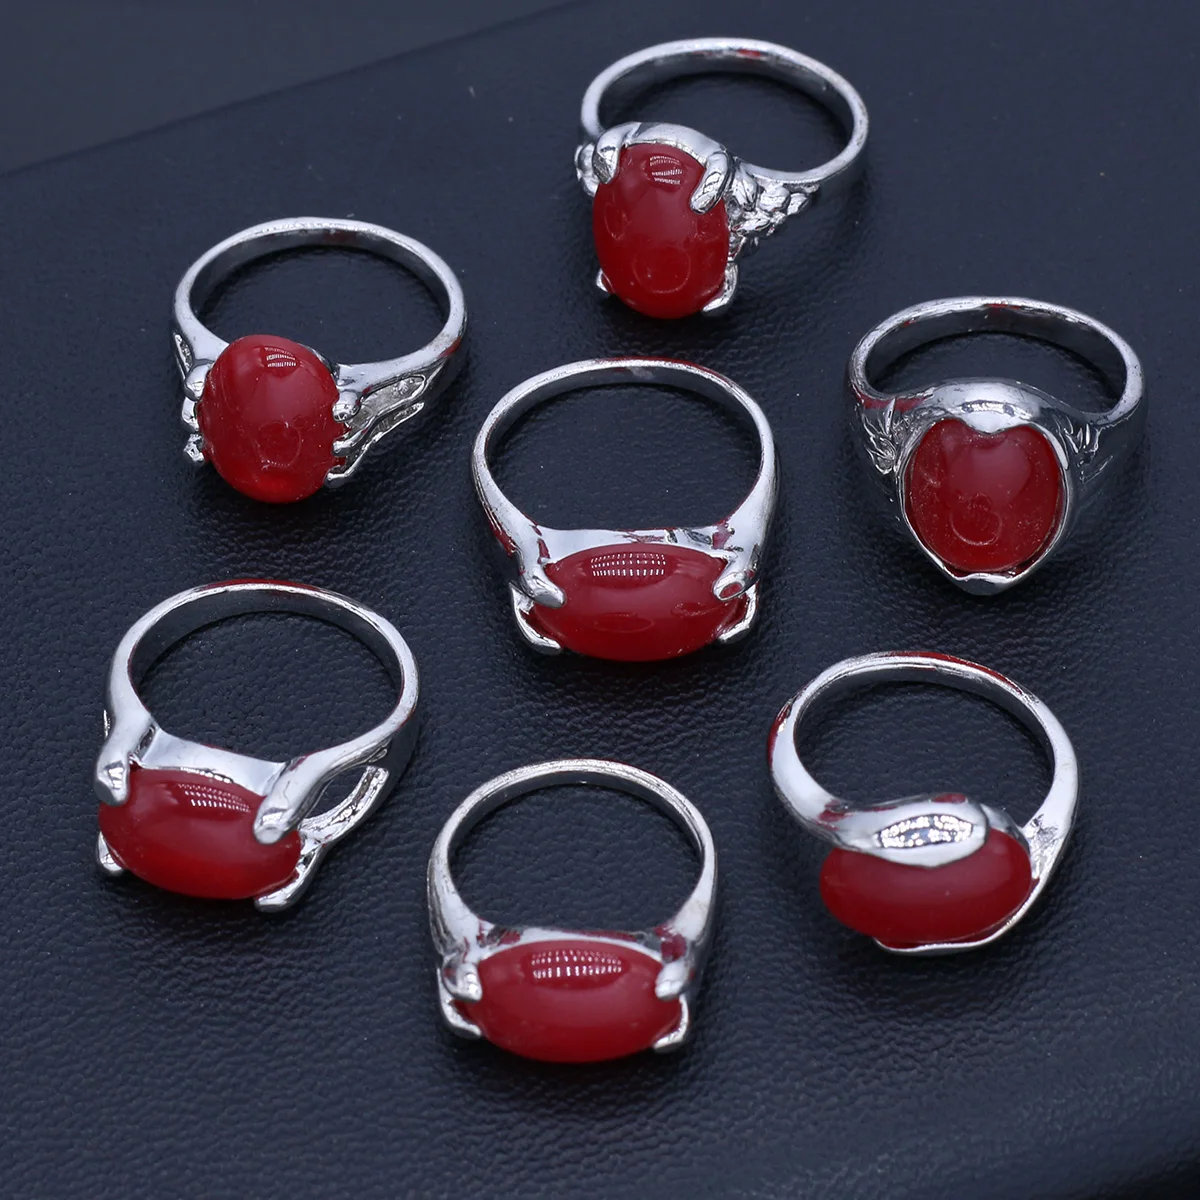 

10Pcs Ring Multi Style Combo White Stone Mixed With Red Charm Fashion Ring Wedding Banquet Party Ring For Woman Jewellery Gift